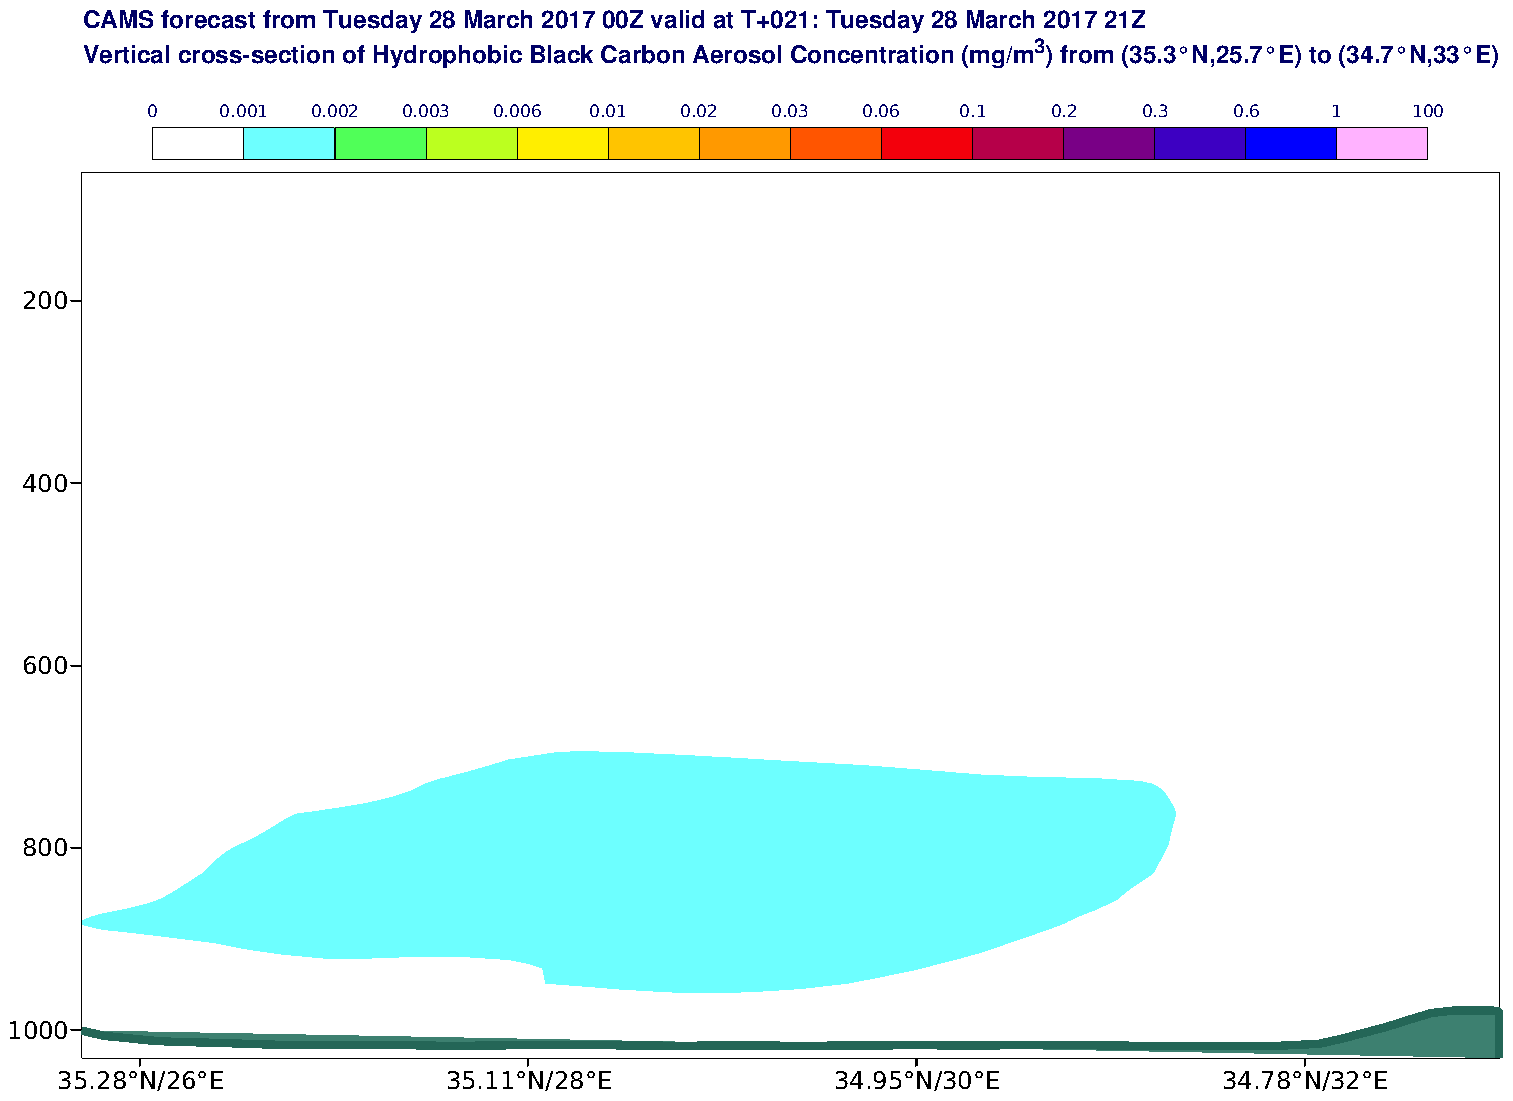 Vertical cross-section of Hydrophobic Black Carbon Aerosol Concentration (mg/m3) valid at T21 - 2017-03-28 21:00